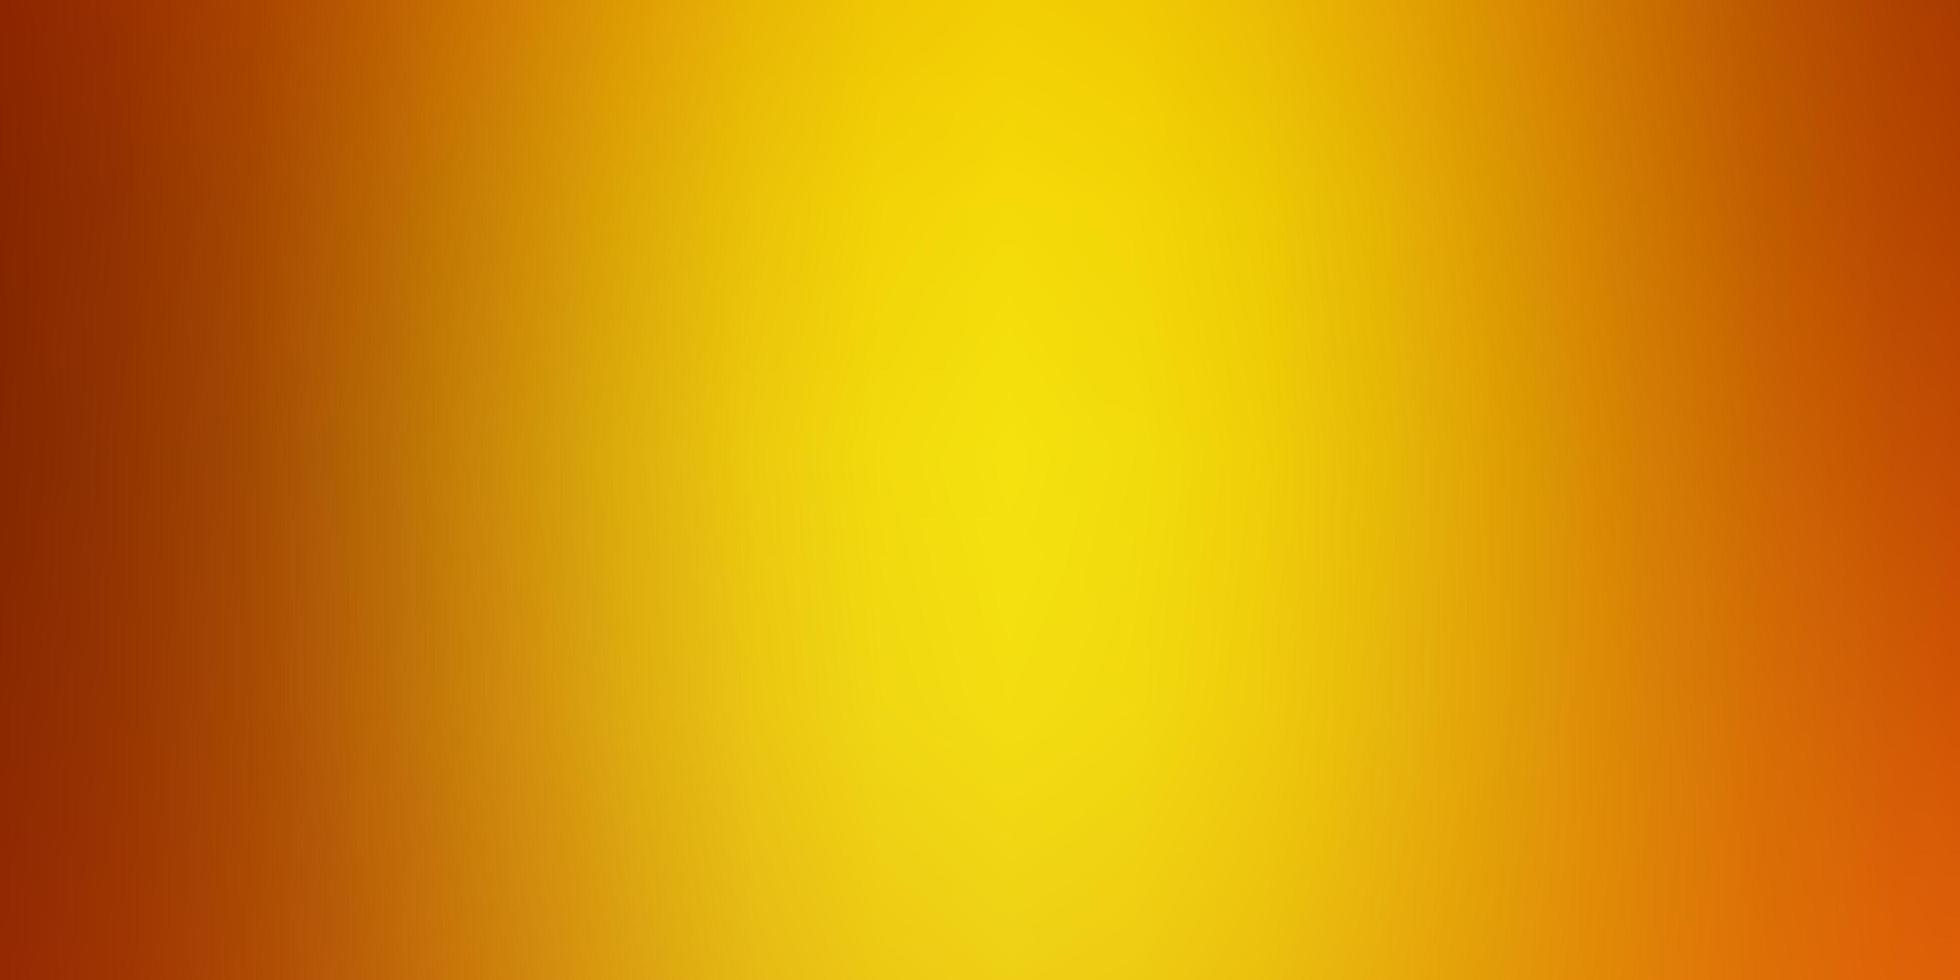 Dark Yellow vector smart blurred texture New colorful illustration in blur style with gradient Sample for your web designers